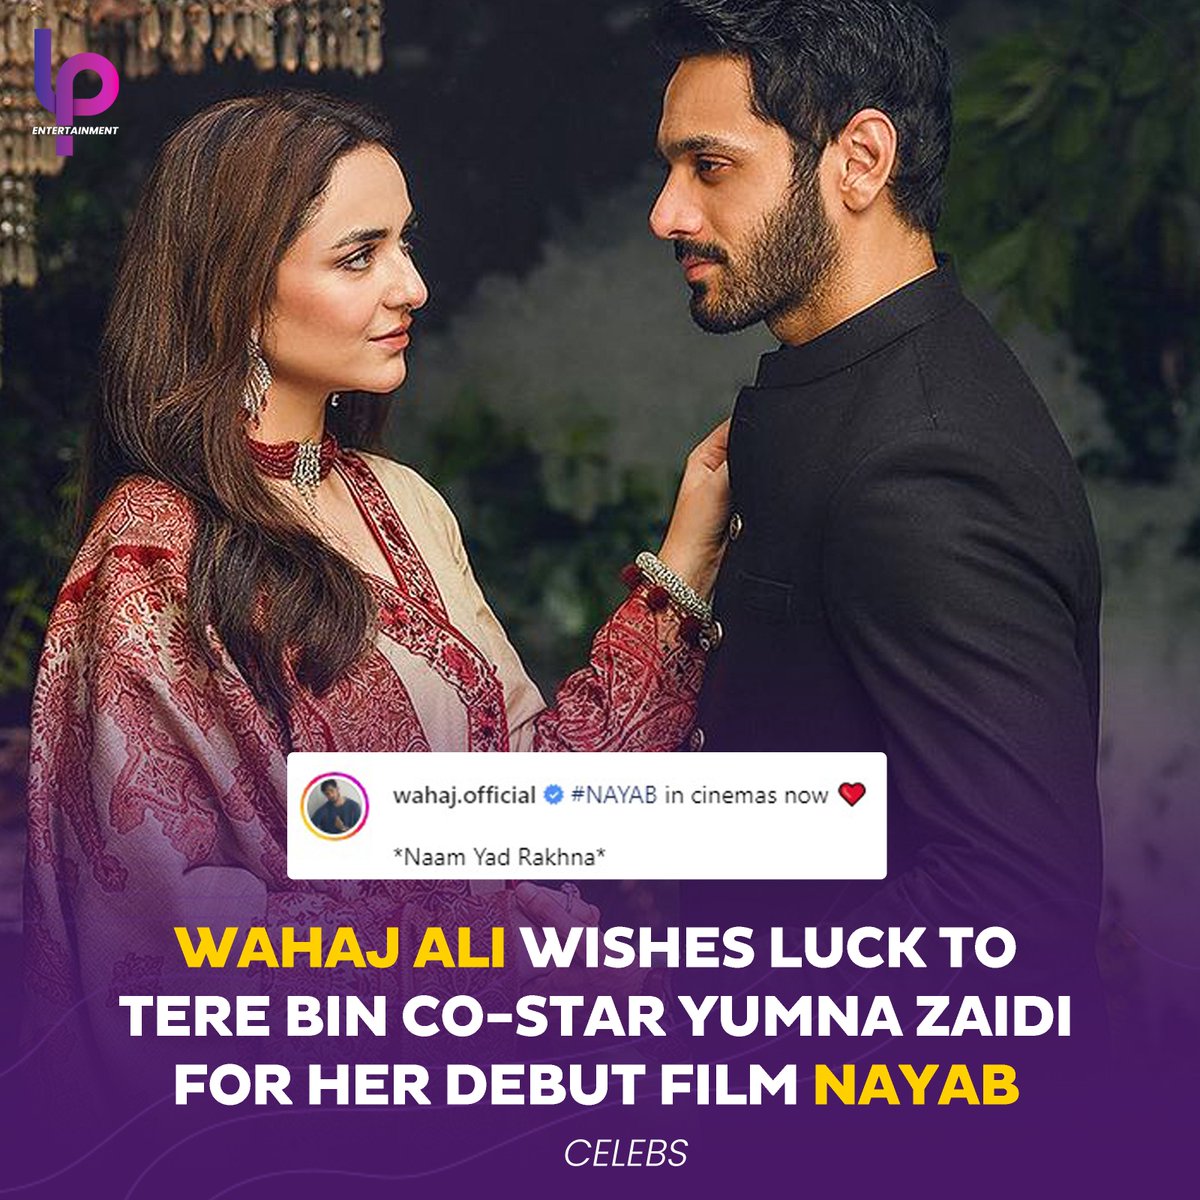 Wahaj Ali gives a shoutout to Yumna Zaidi's debut film Nayab which is releasing today in cinemas all over Pakistan. 
Tere Bin co-stars are never shy of supporting each other in their projects. 🙌😍

#WahajAli #YumnaZaidi #LPEntertainment #Celebrities #NayabTheMovie #InCinemasNow